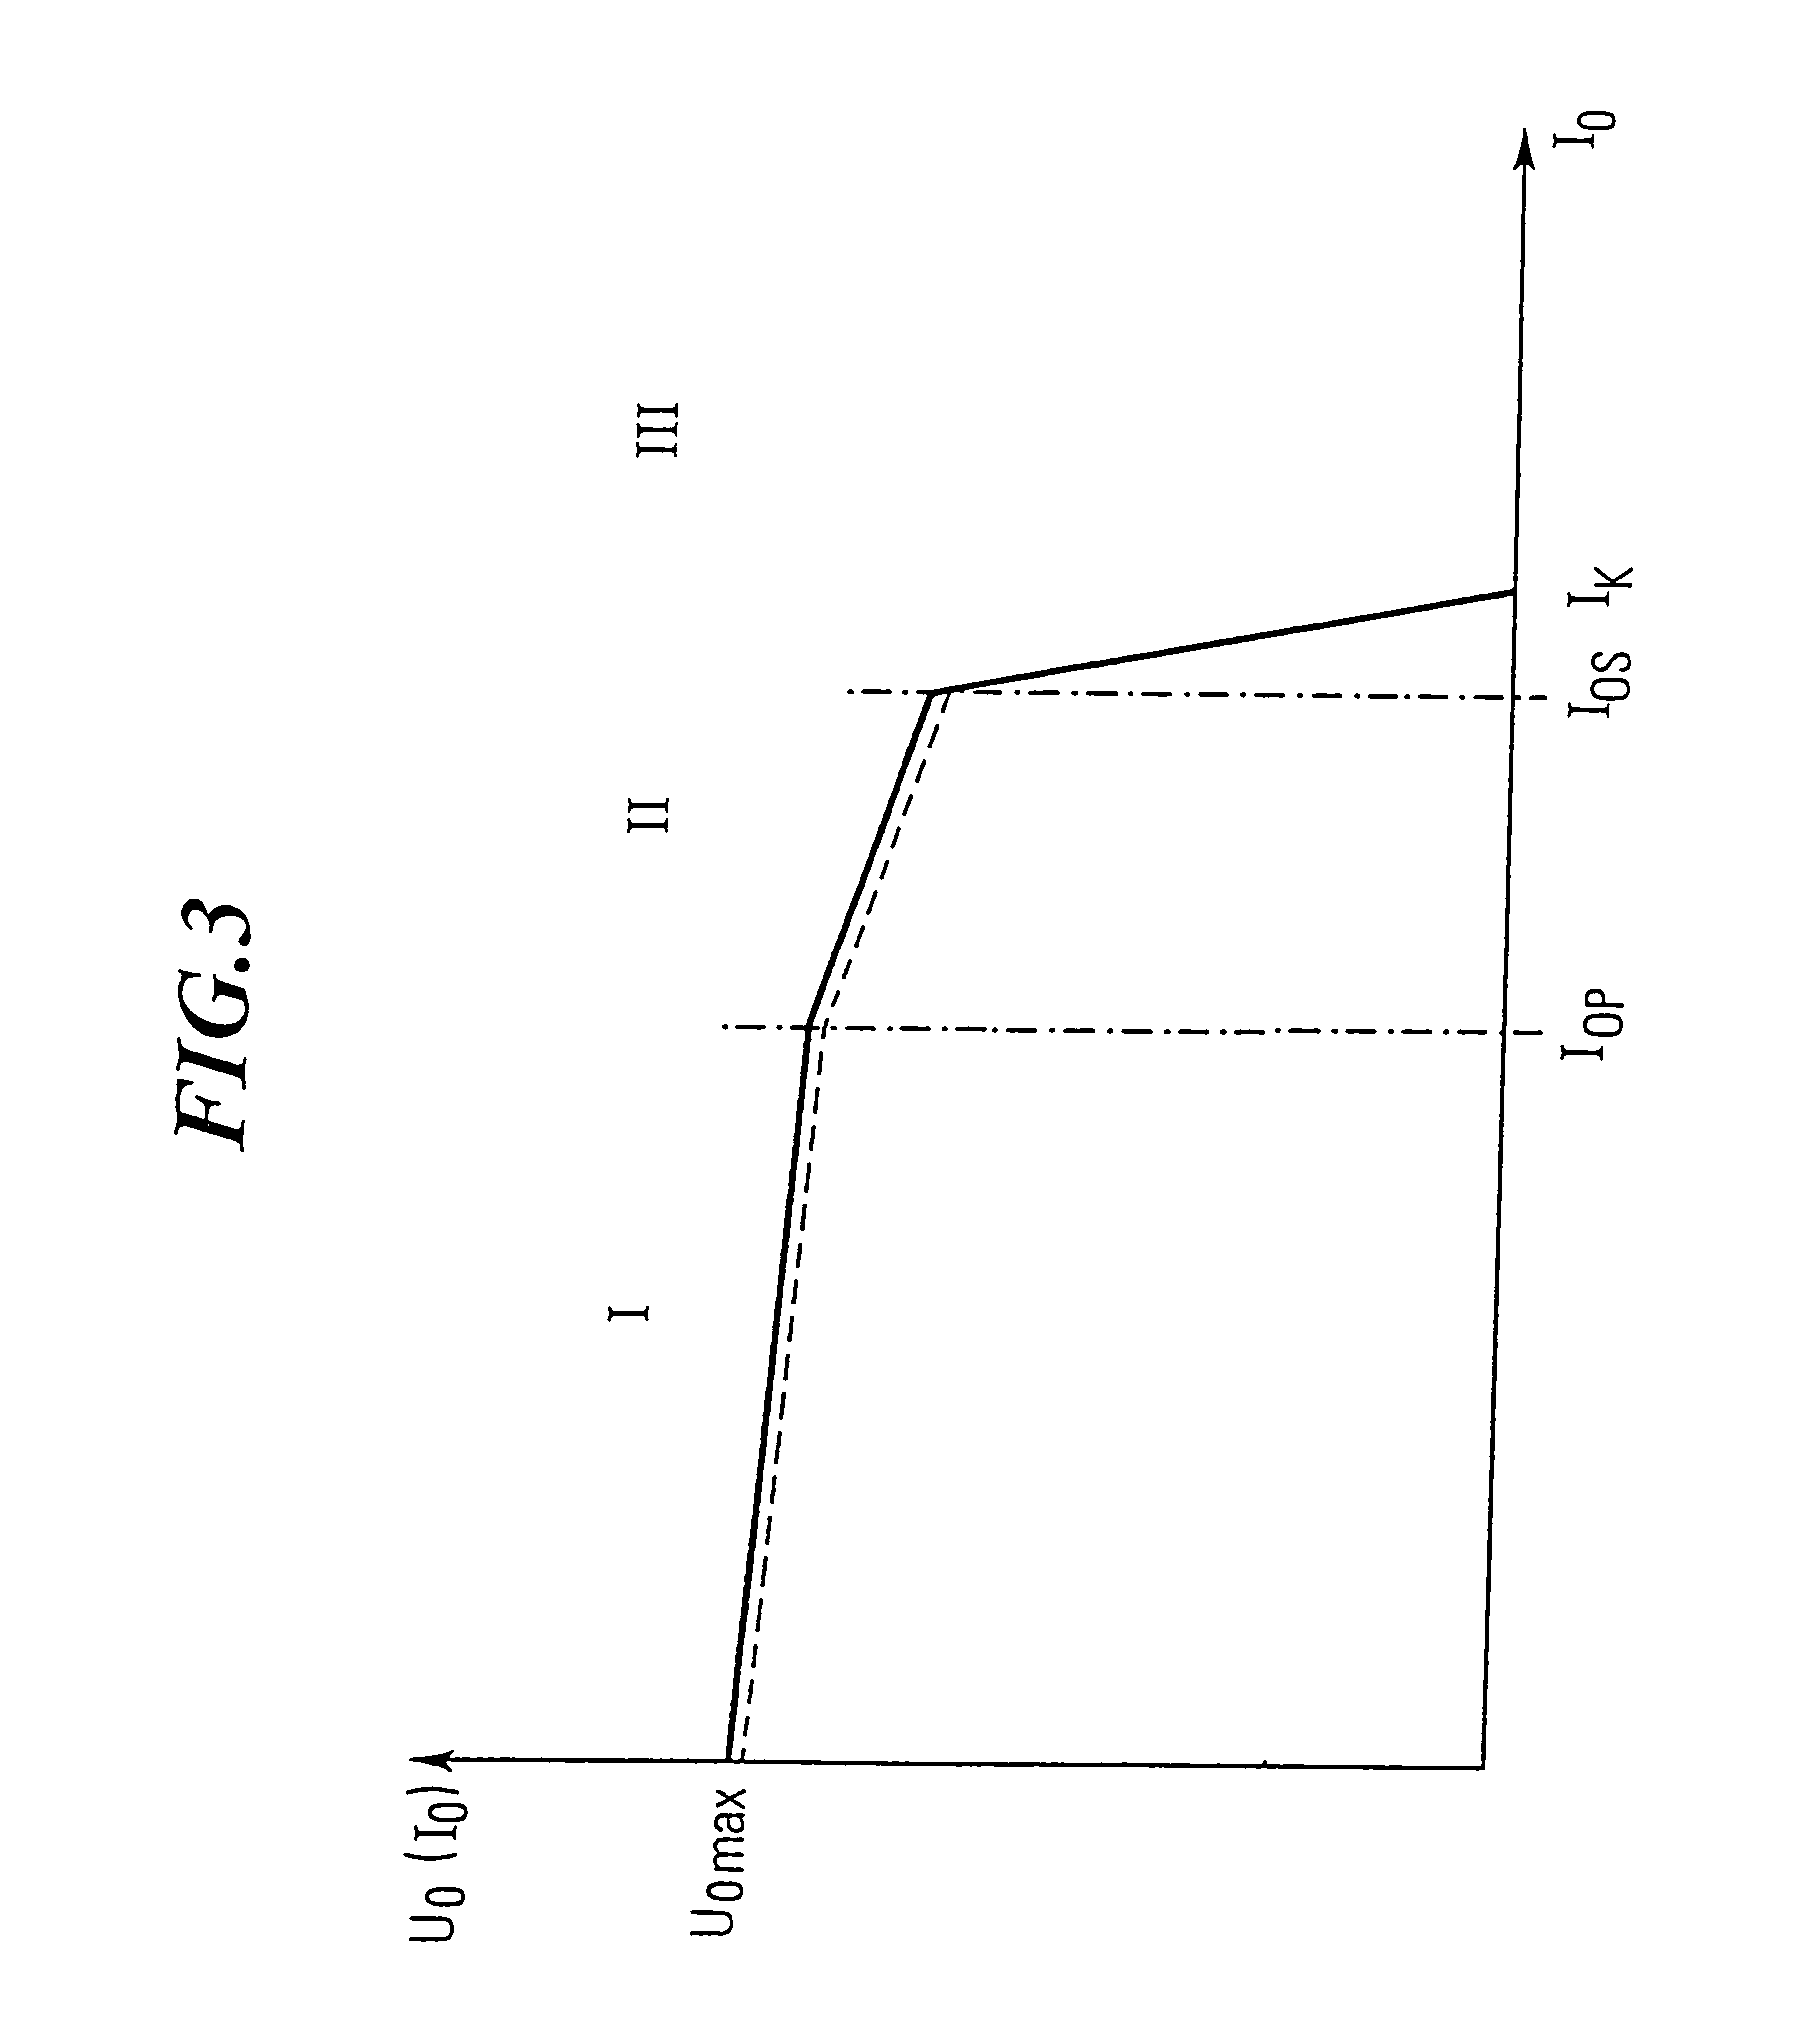 Power supply device comprising several switched-mode power supply units that are connected in parallel